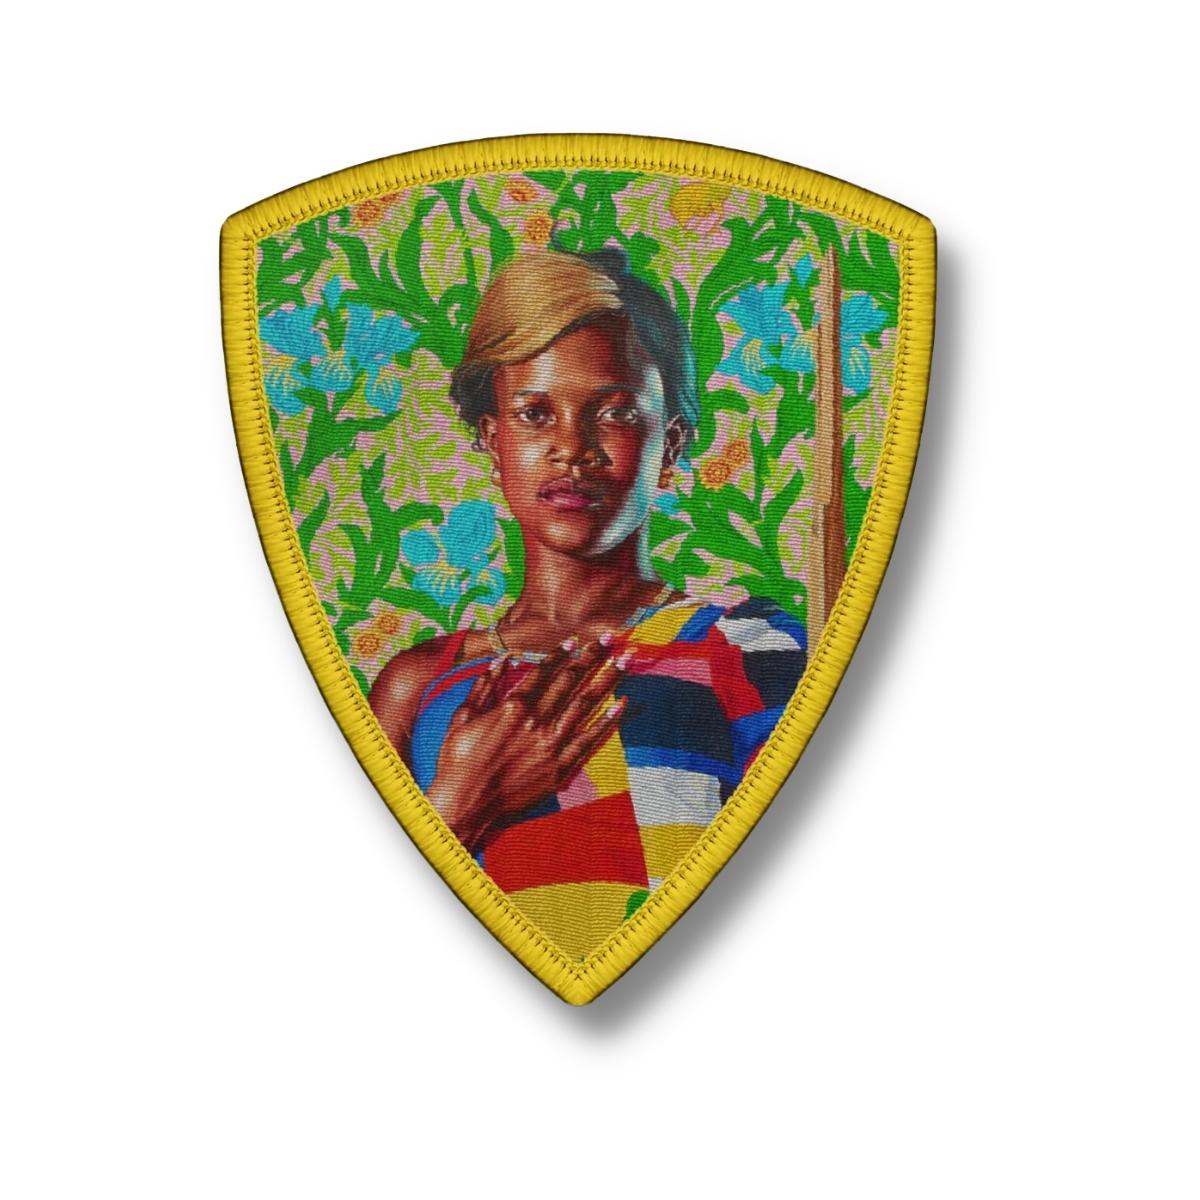 Kehinde Wiley - Saint John The Baptist in The Wilderness patch